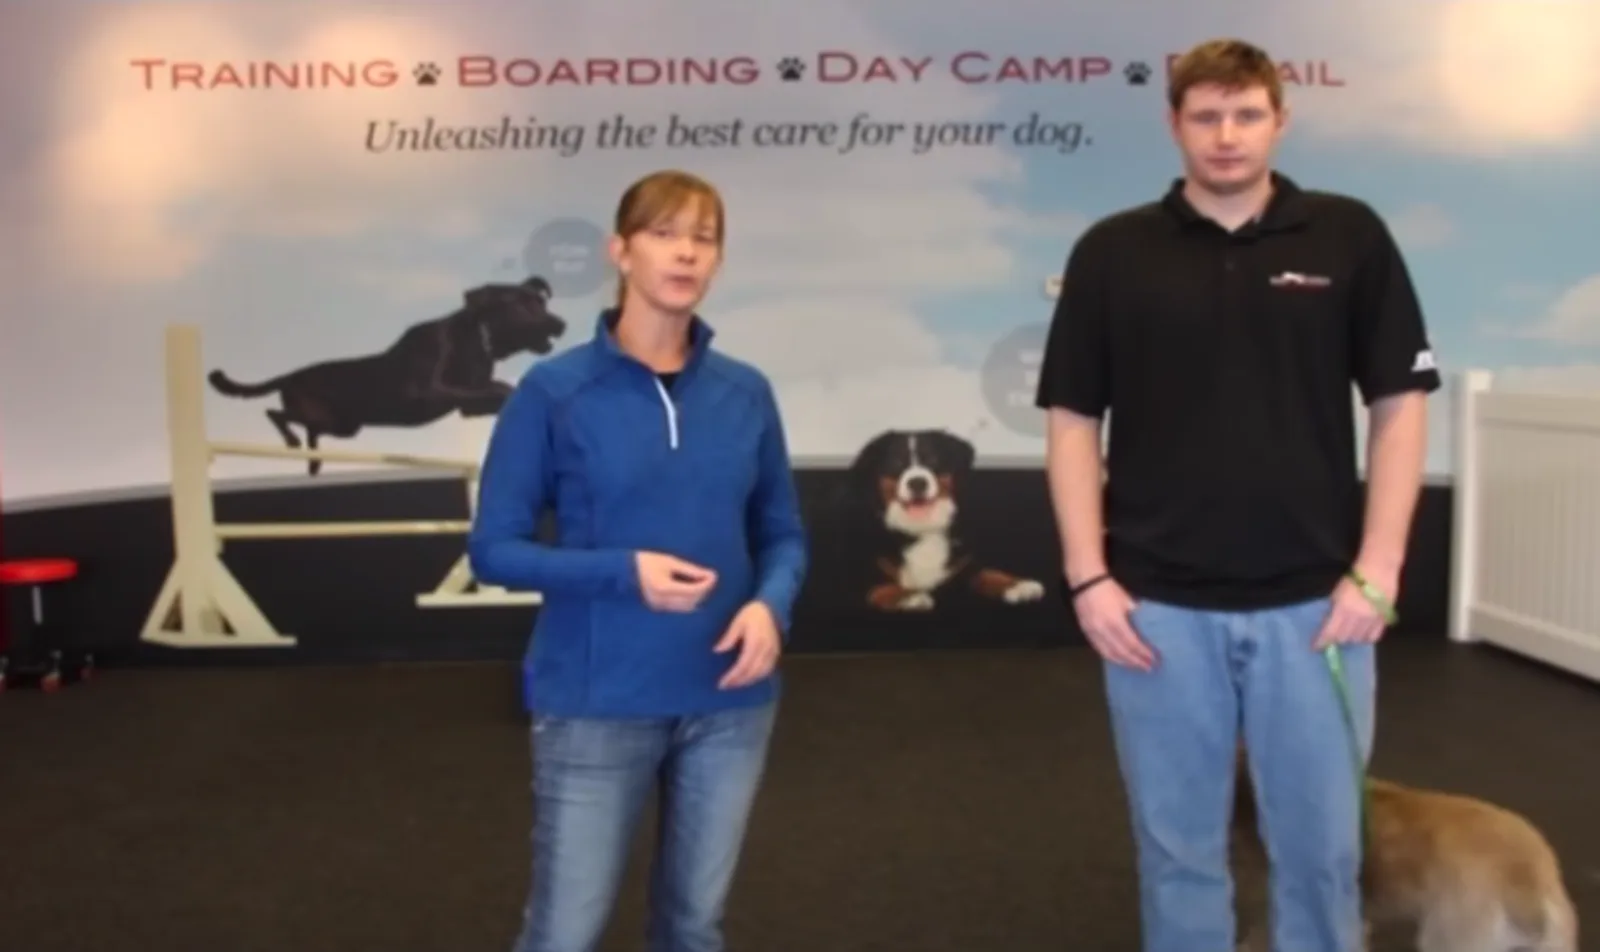 Blonde woman in blue shirt and man in black polo shirt in a dog training facility.